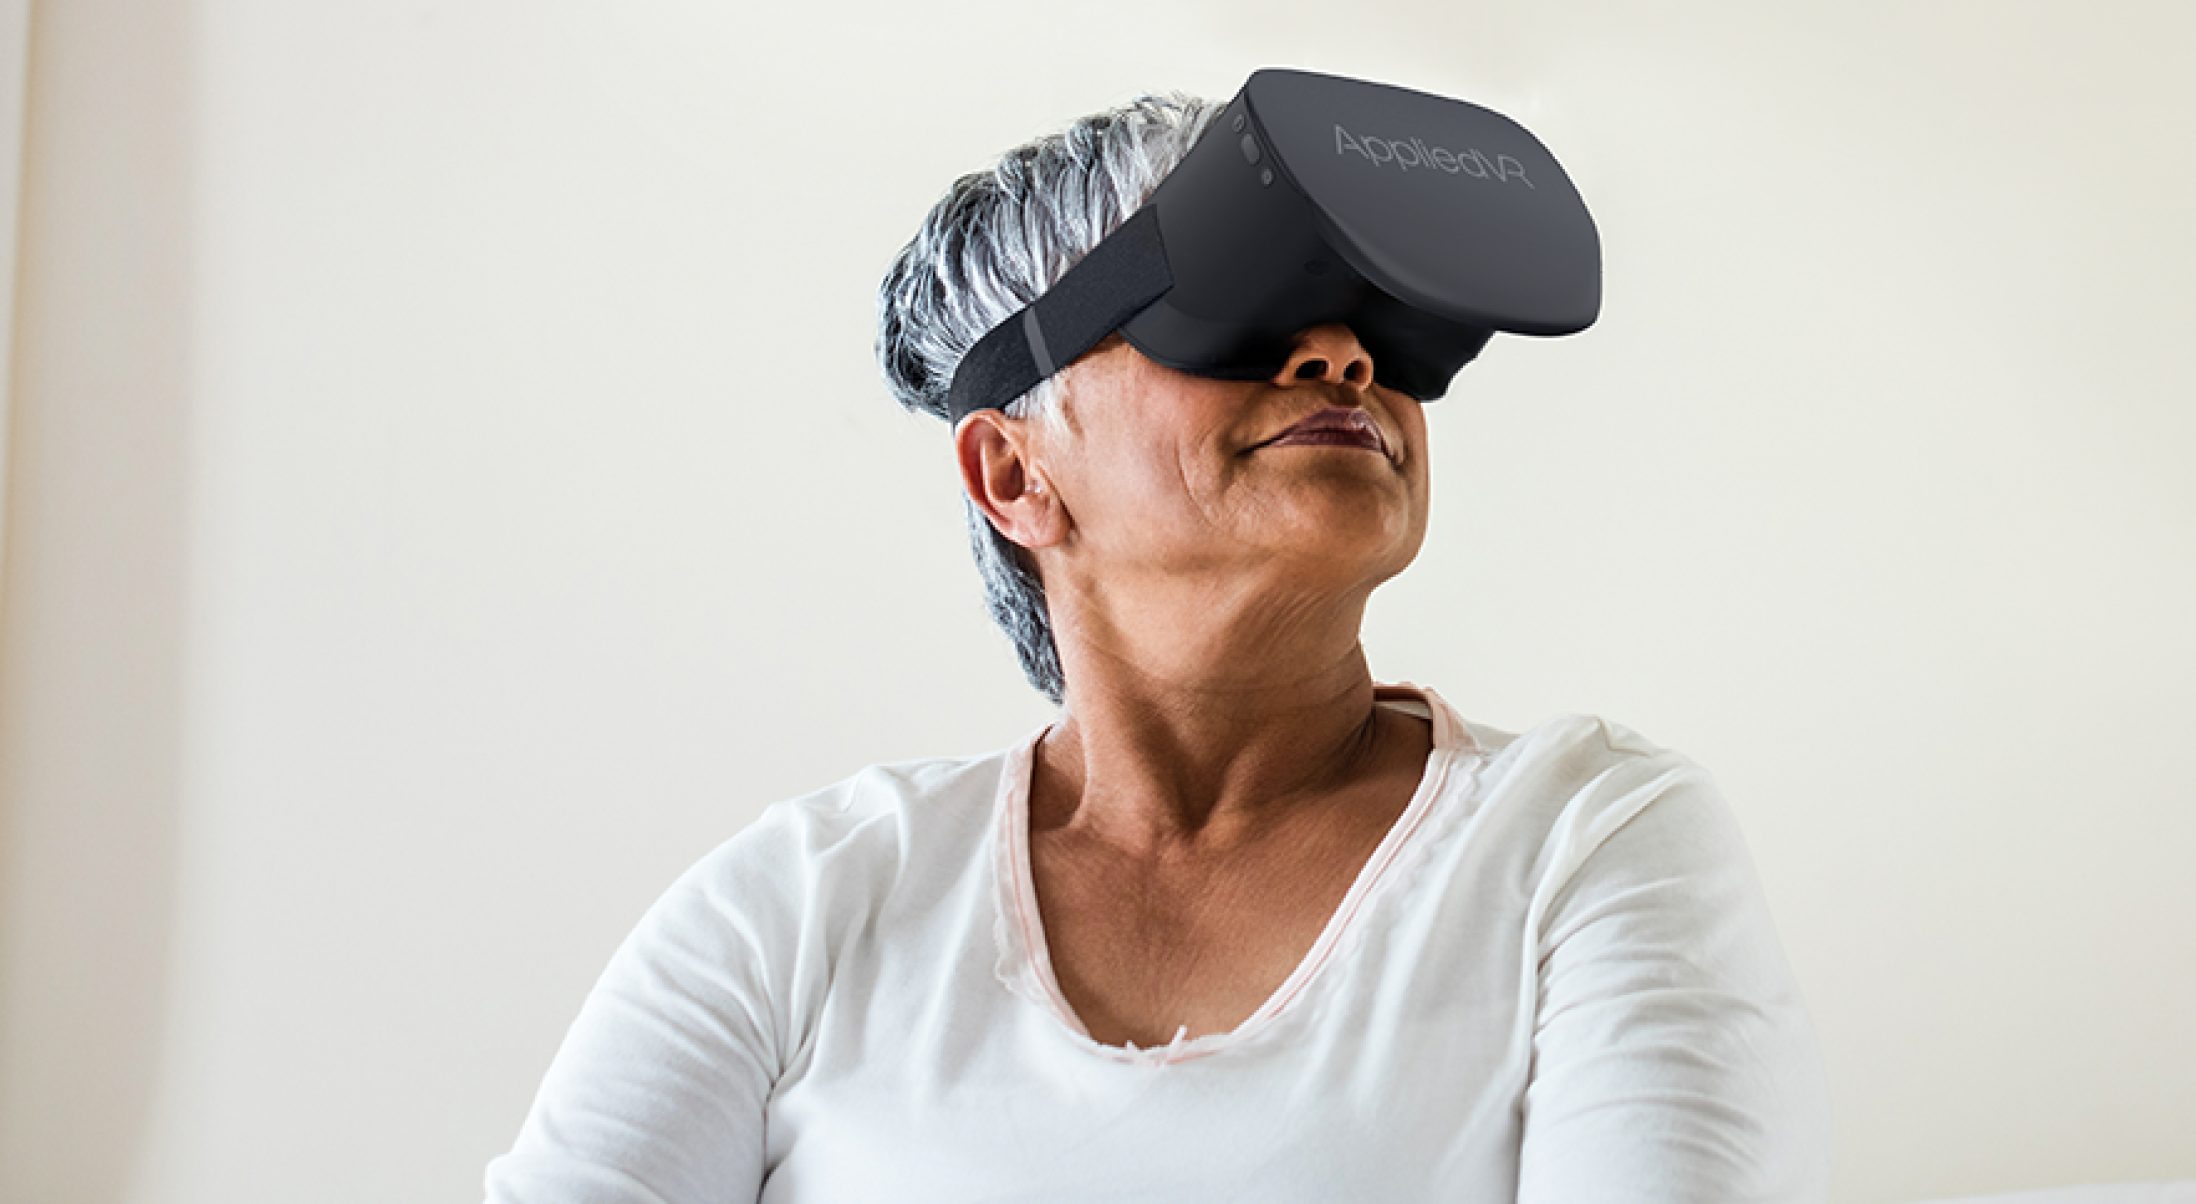 Patient wearing VR headset used to treat low back pain